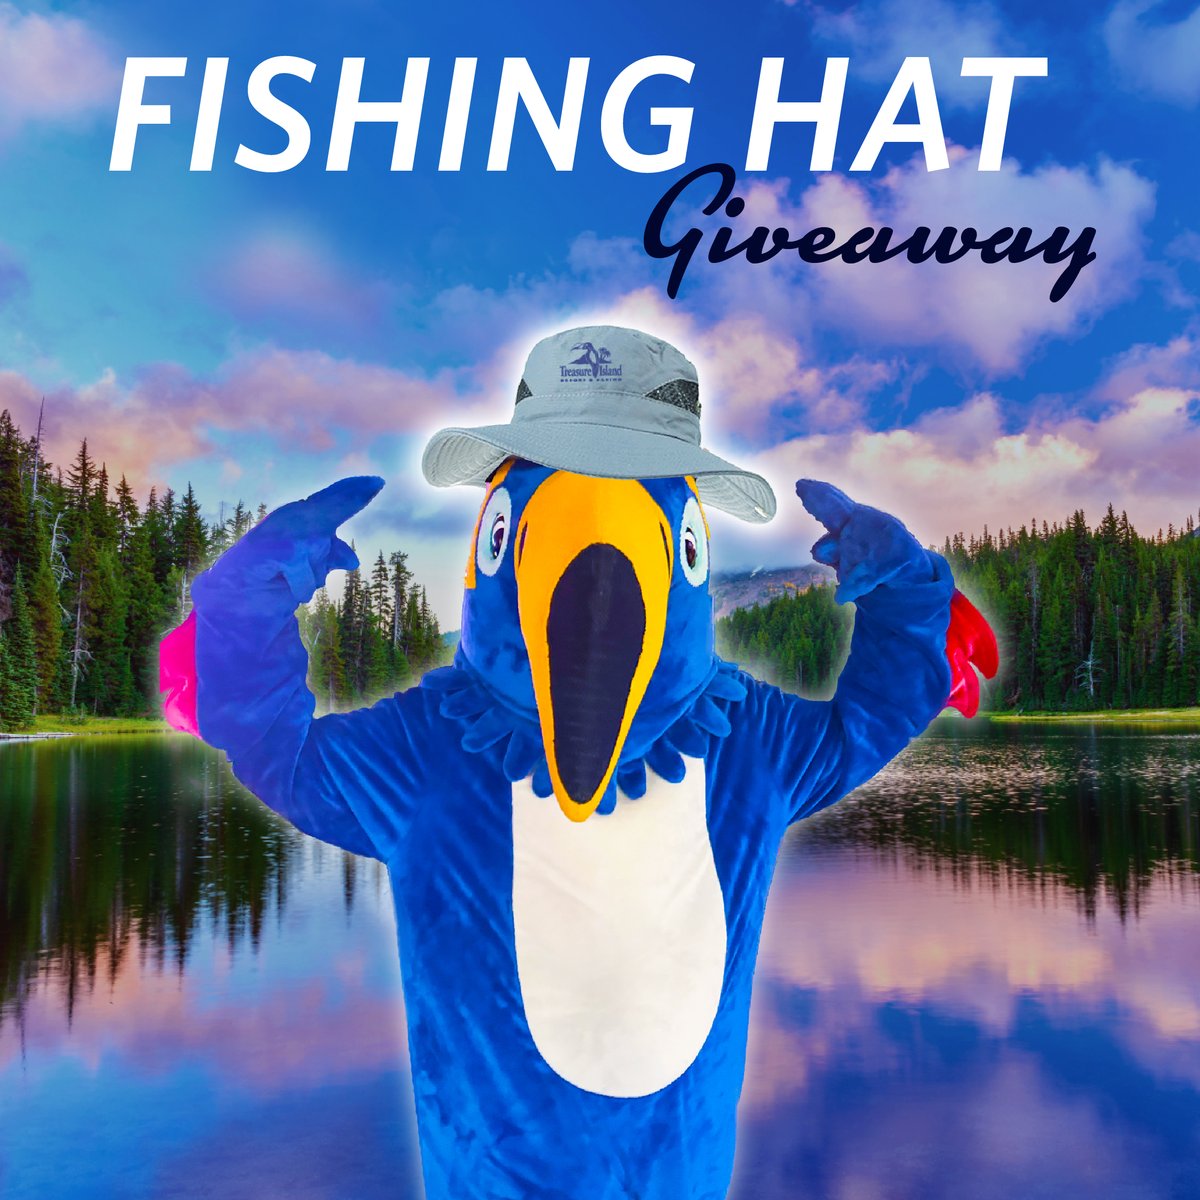 Hook the big one in style! Bring your 2024 fishing license to the Island Passport Club starting Saturday, May 11 to receive a FREE fishing hat, available while supplies last! 🎣 Details: ticasino.com